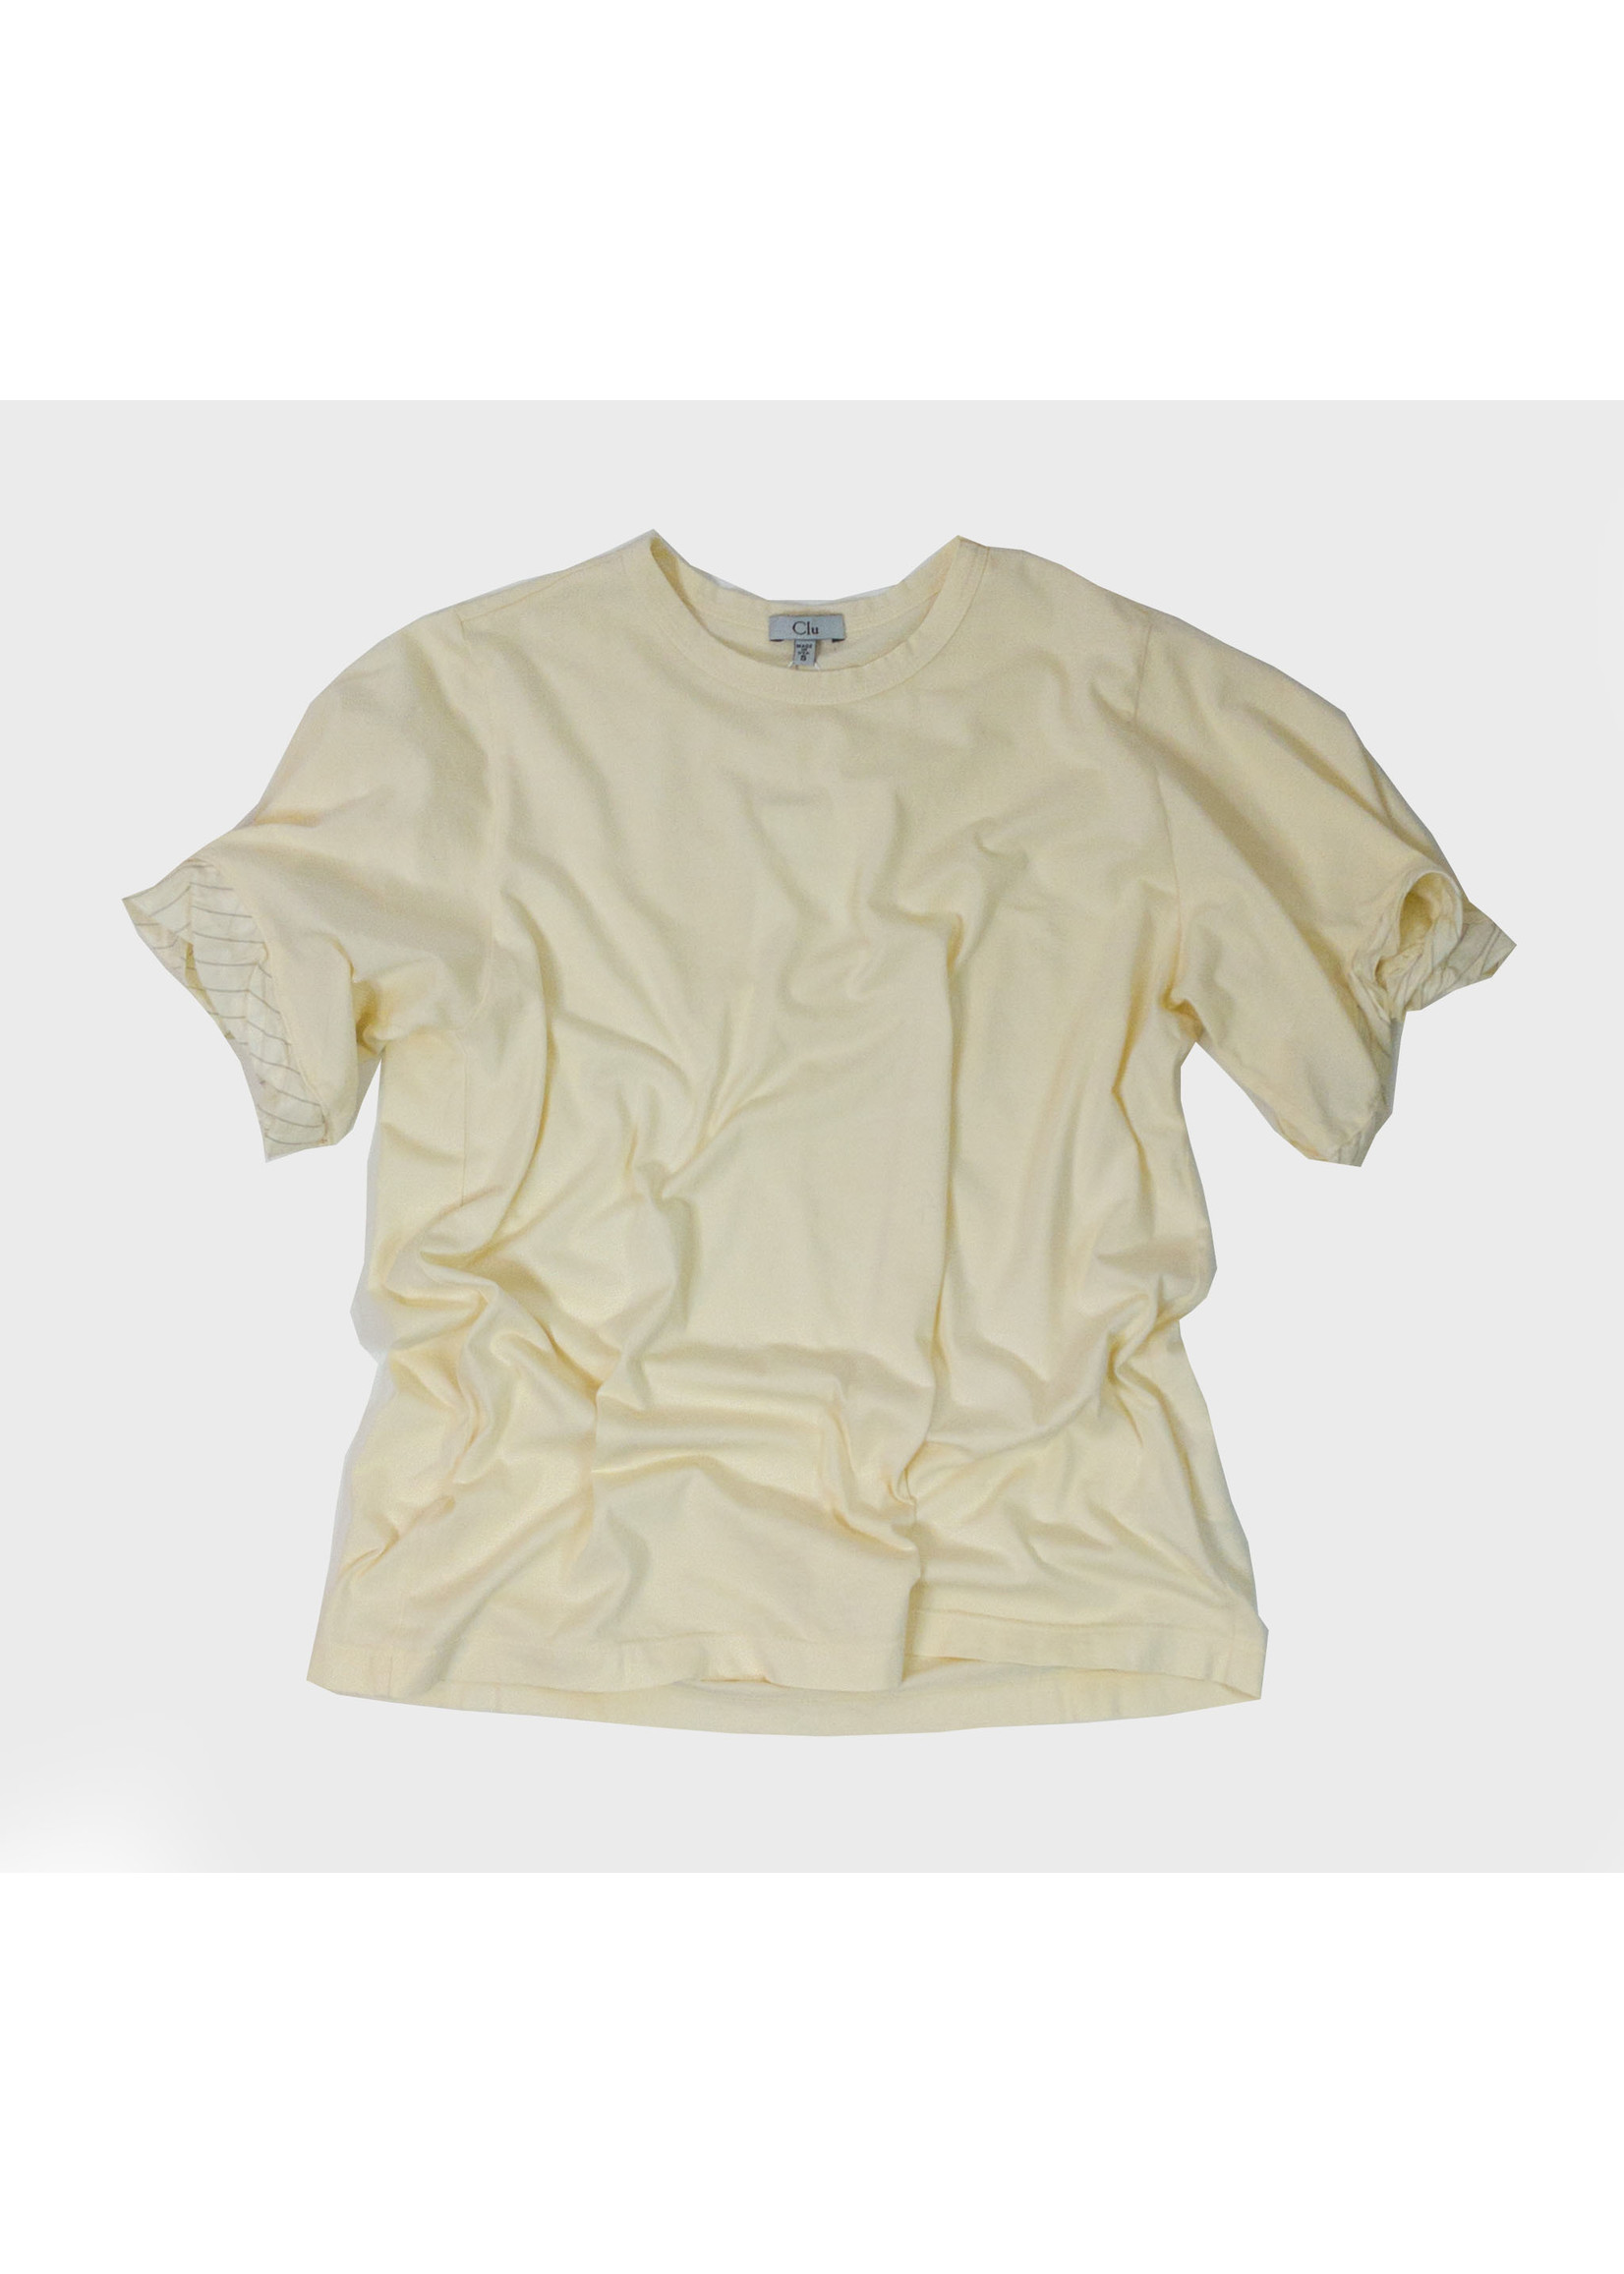 CLU Twisted Contrast Sleeve, Garment Dyed T-Shirt